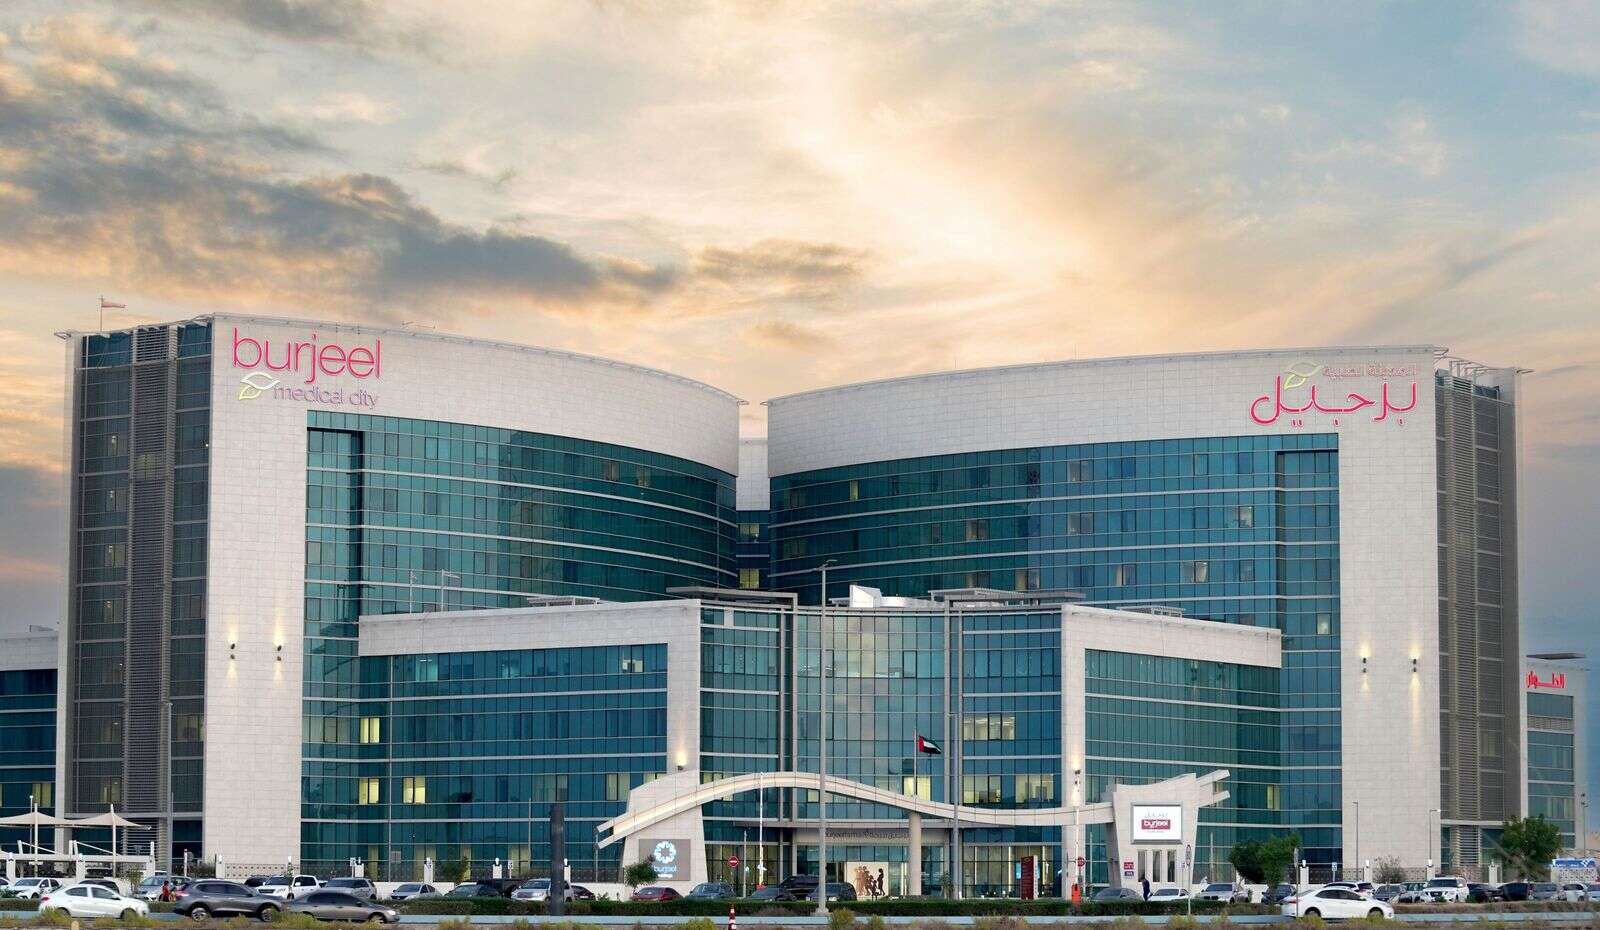 abu dhabi’s burjeel holdings reports 11% revenue growth on higher patient footfall